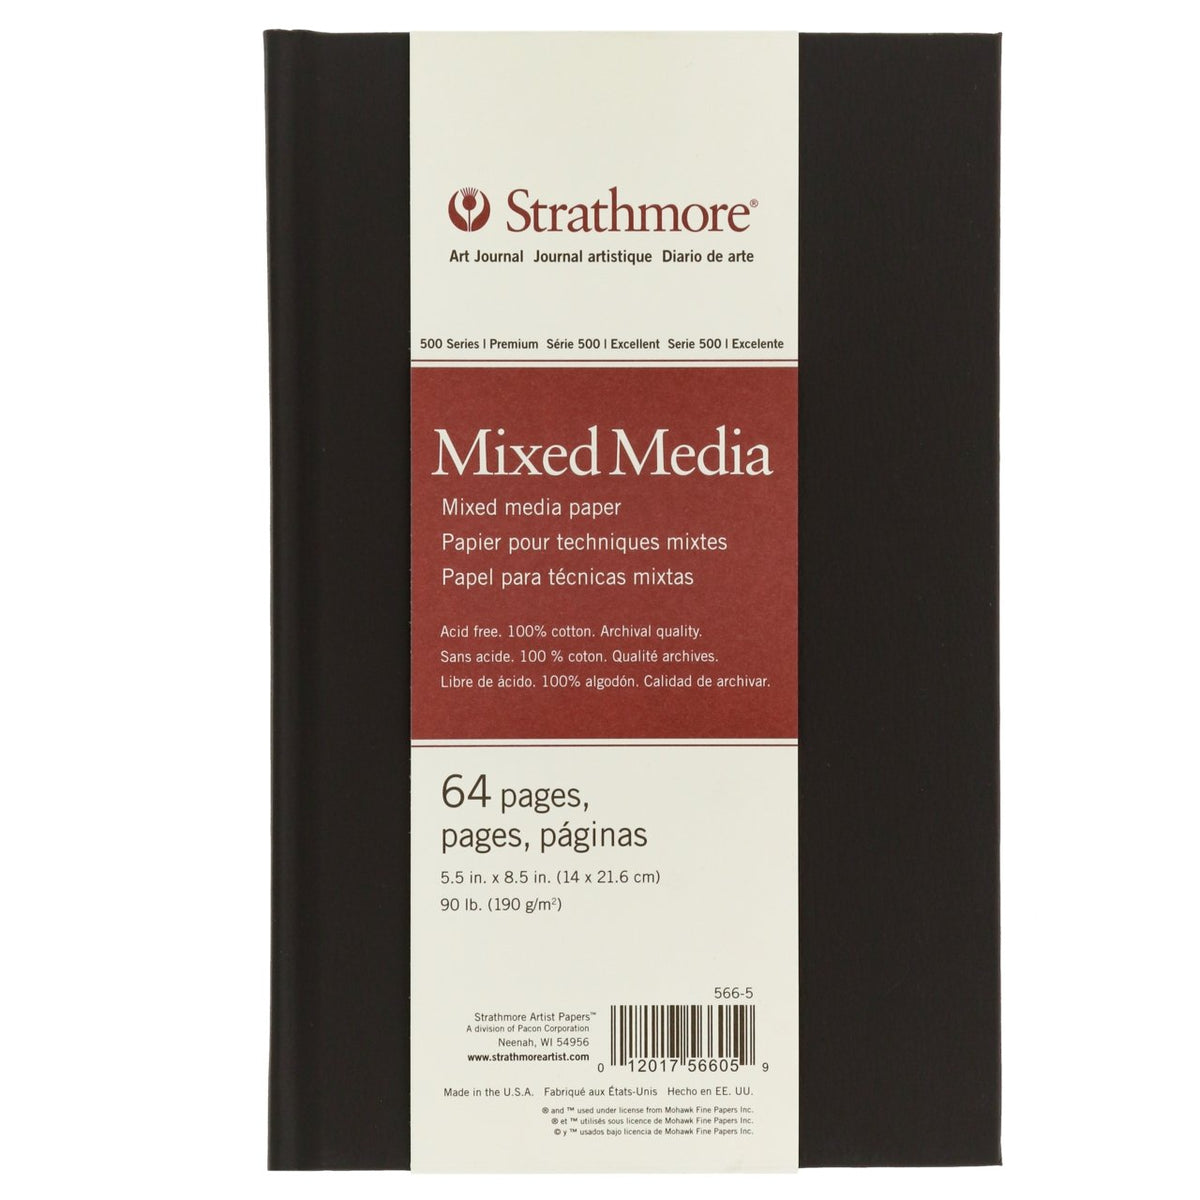 Product Review: Strathmore's Mixed Media Art Journal